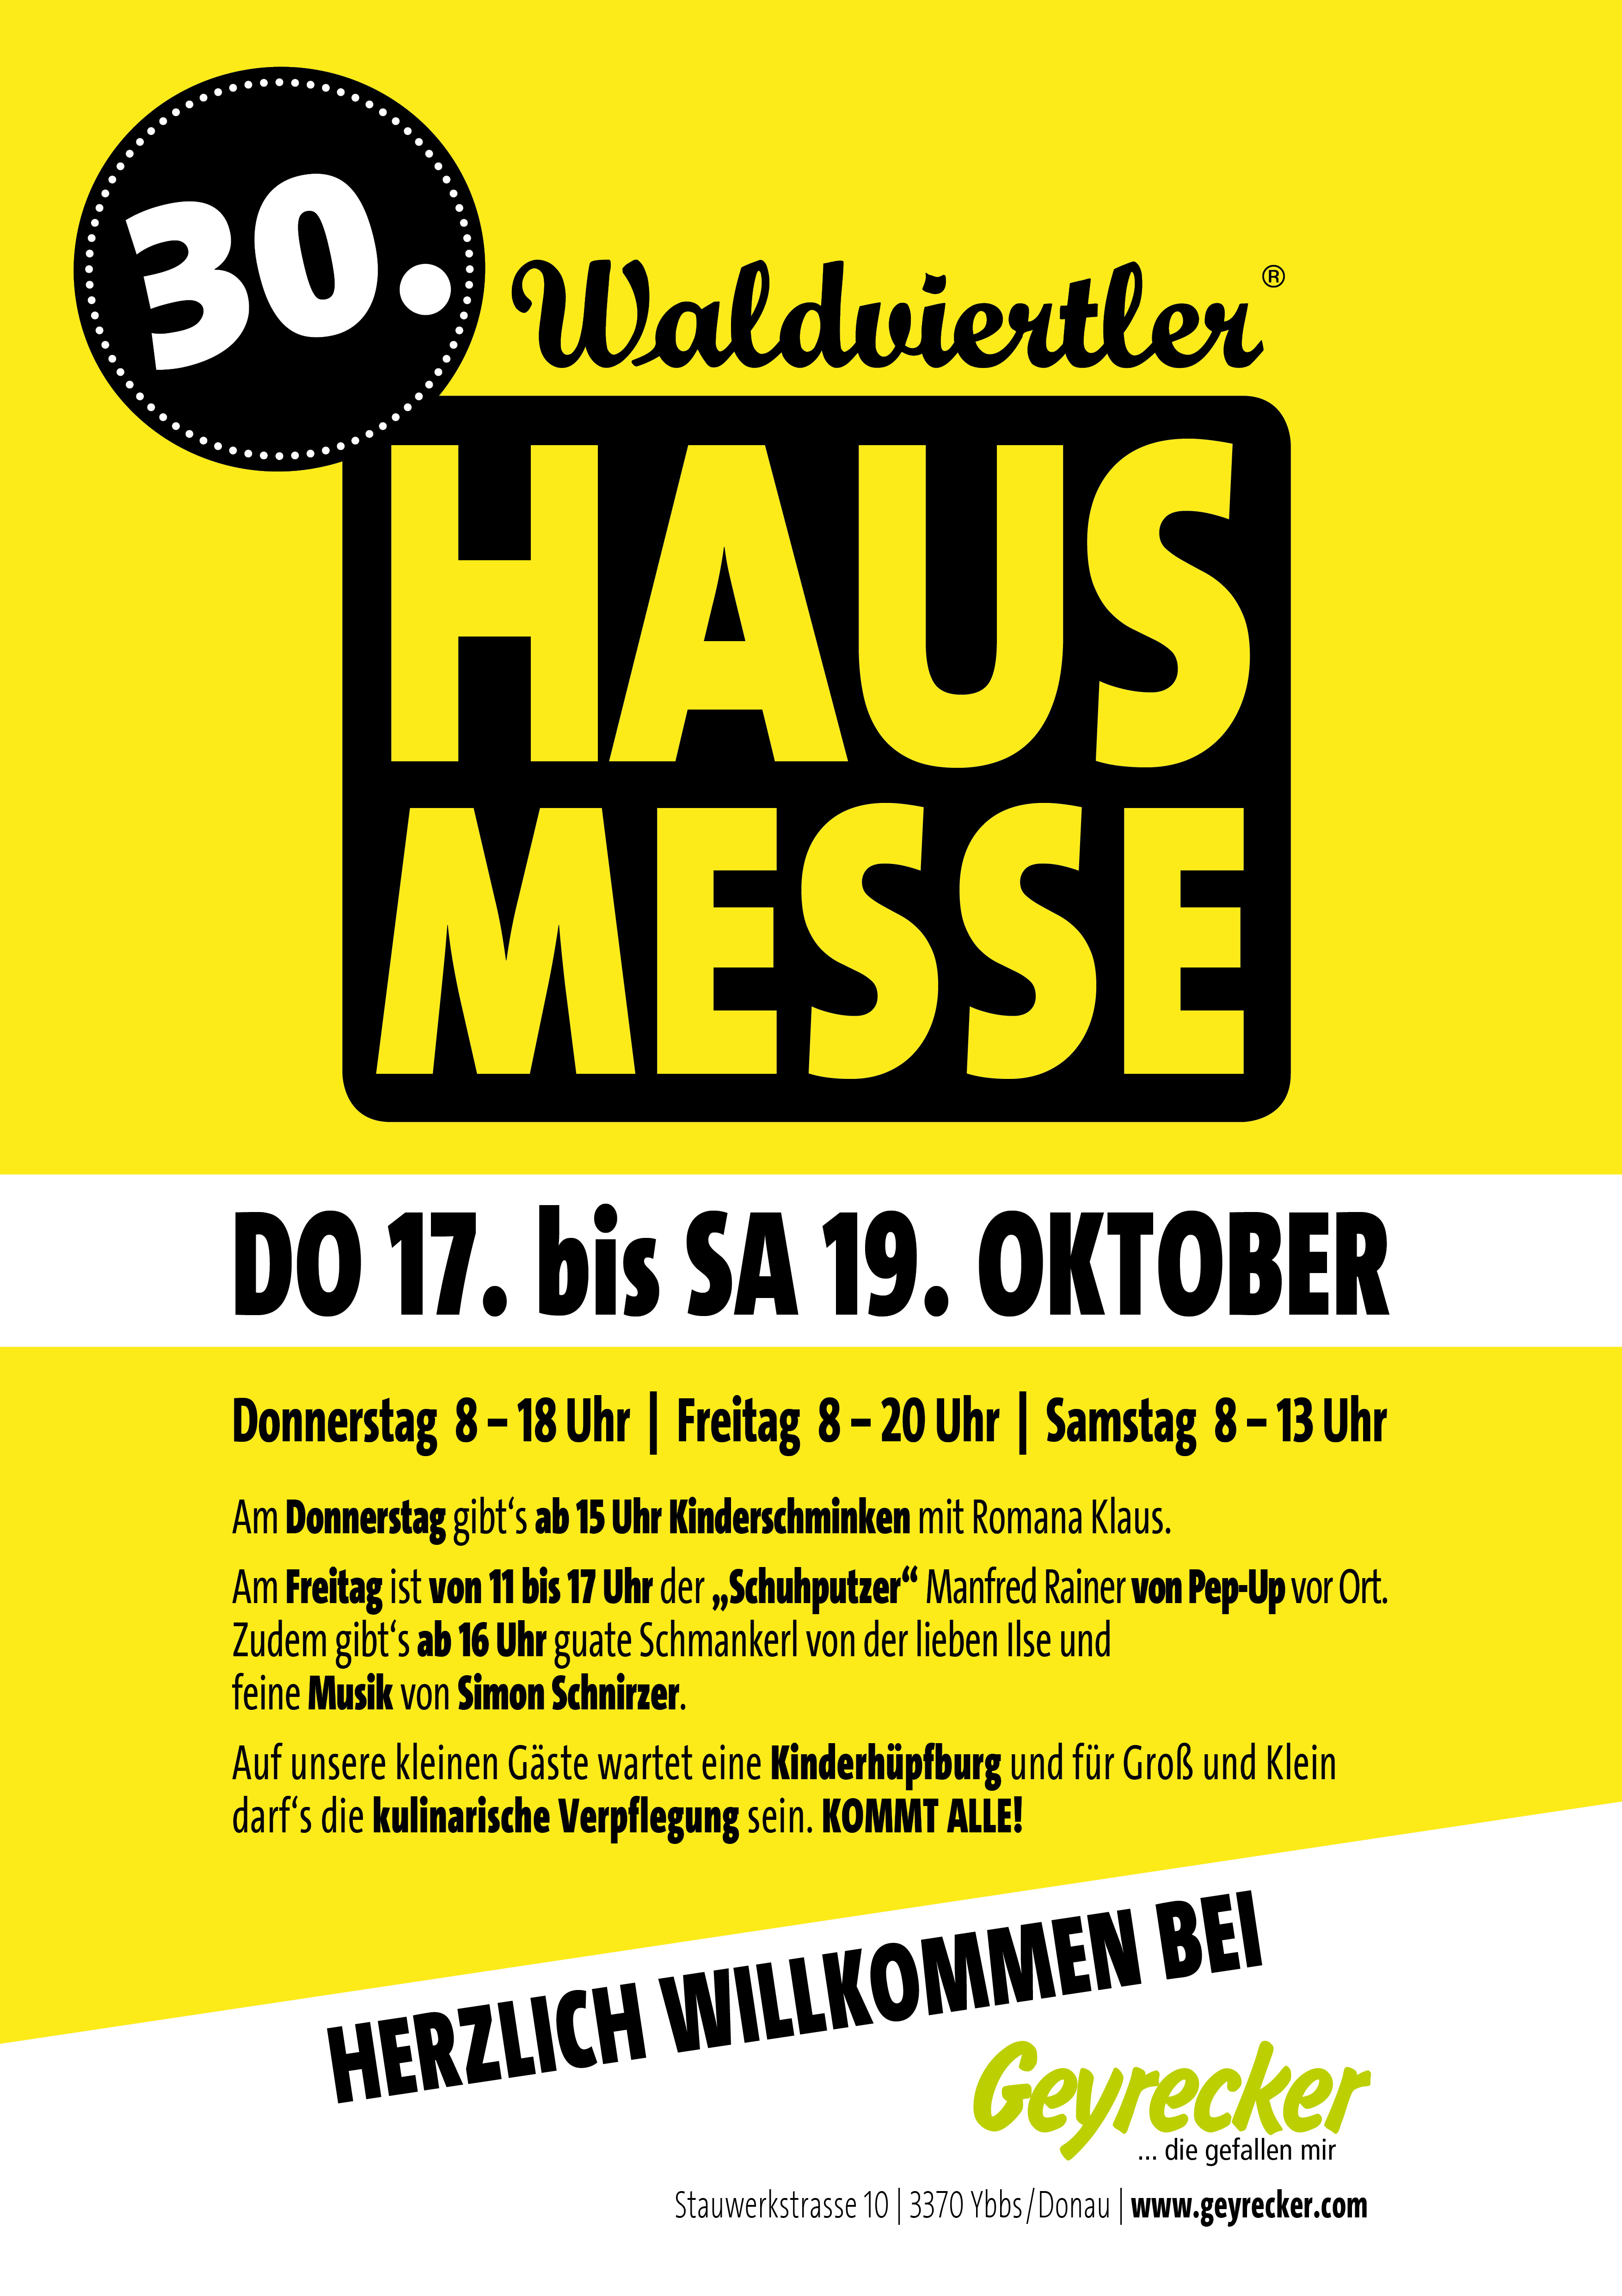 You are currently viewing 30. Waldviertler Hausmesse 17. – 19. Oktober 2019